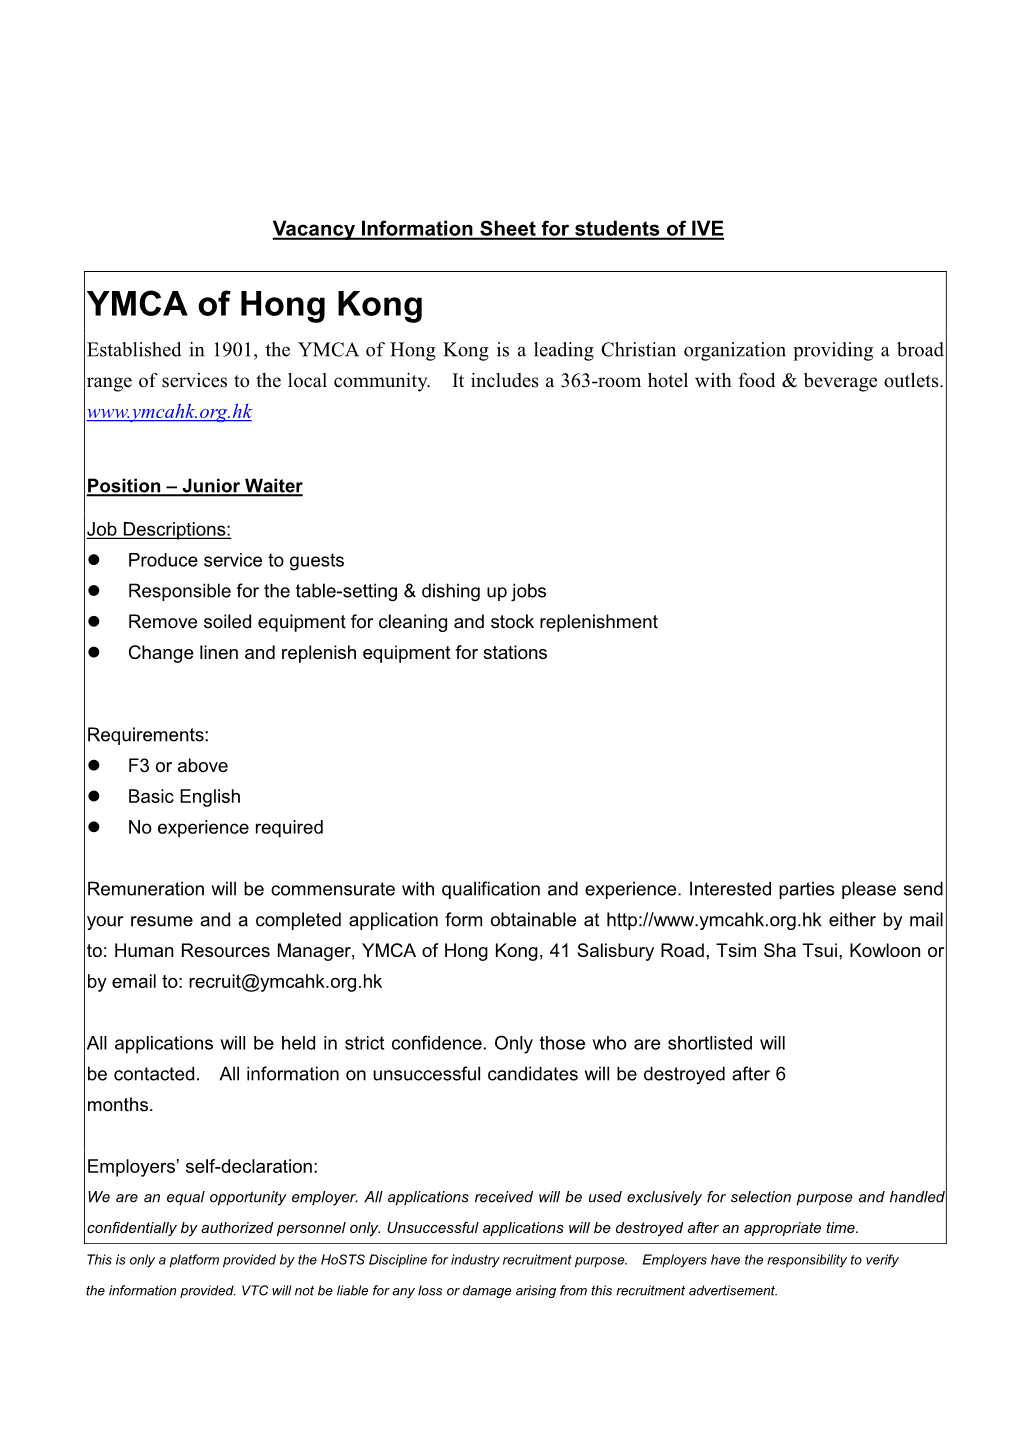 YMCA of Hong Kong Established in 1901, the YMCA of Hong Kong Is a Leading Christian Organization Providing a Broad Range of Services to the Local Community